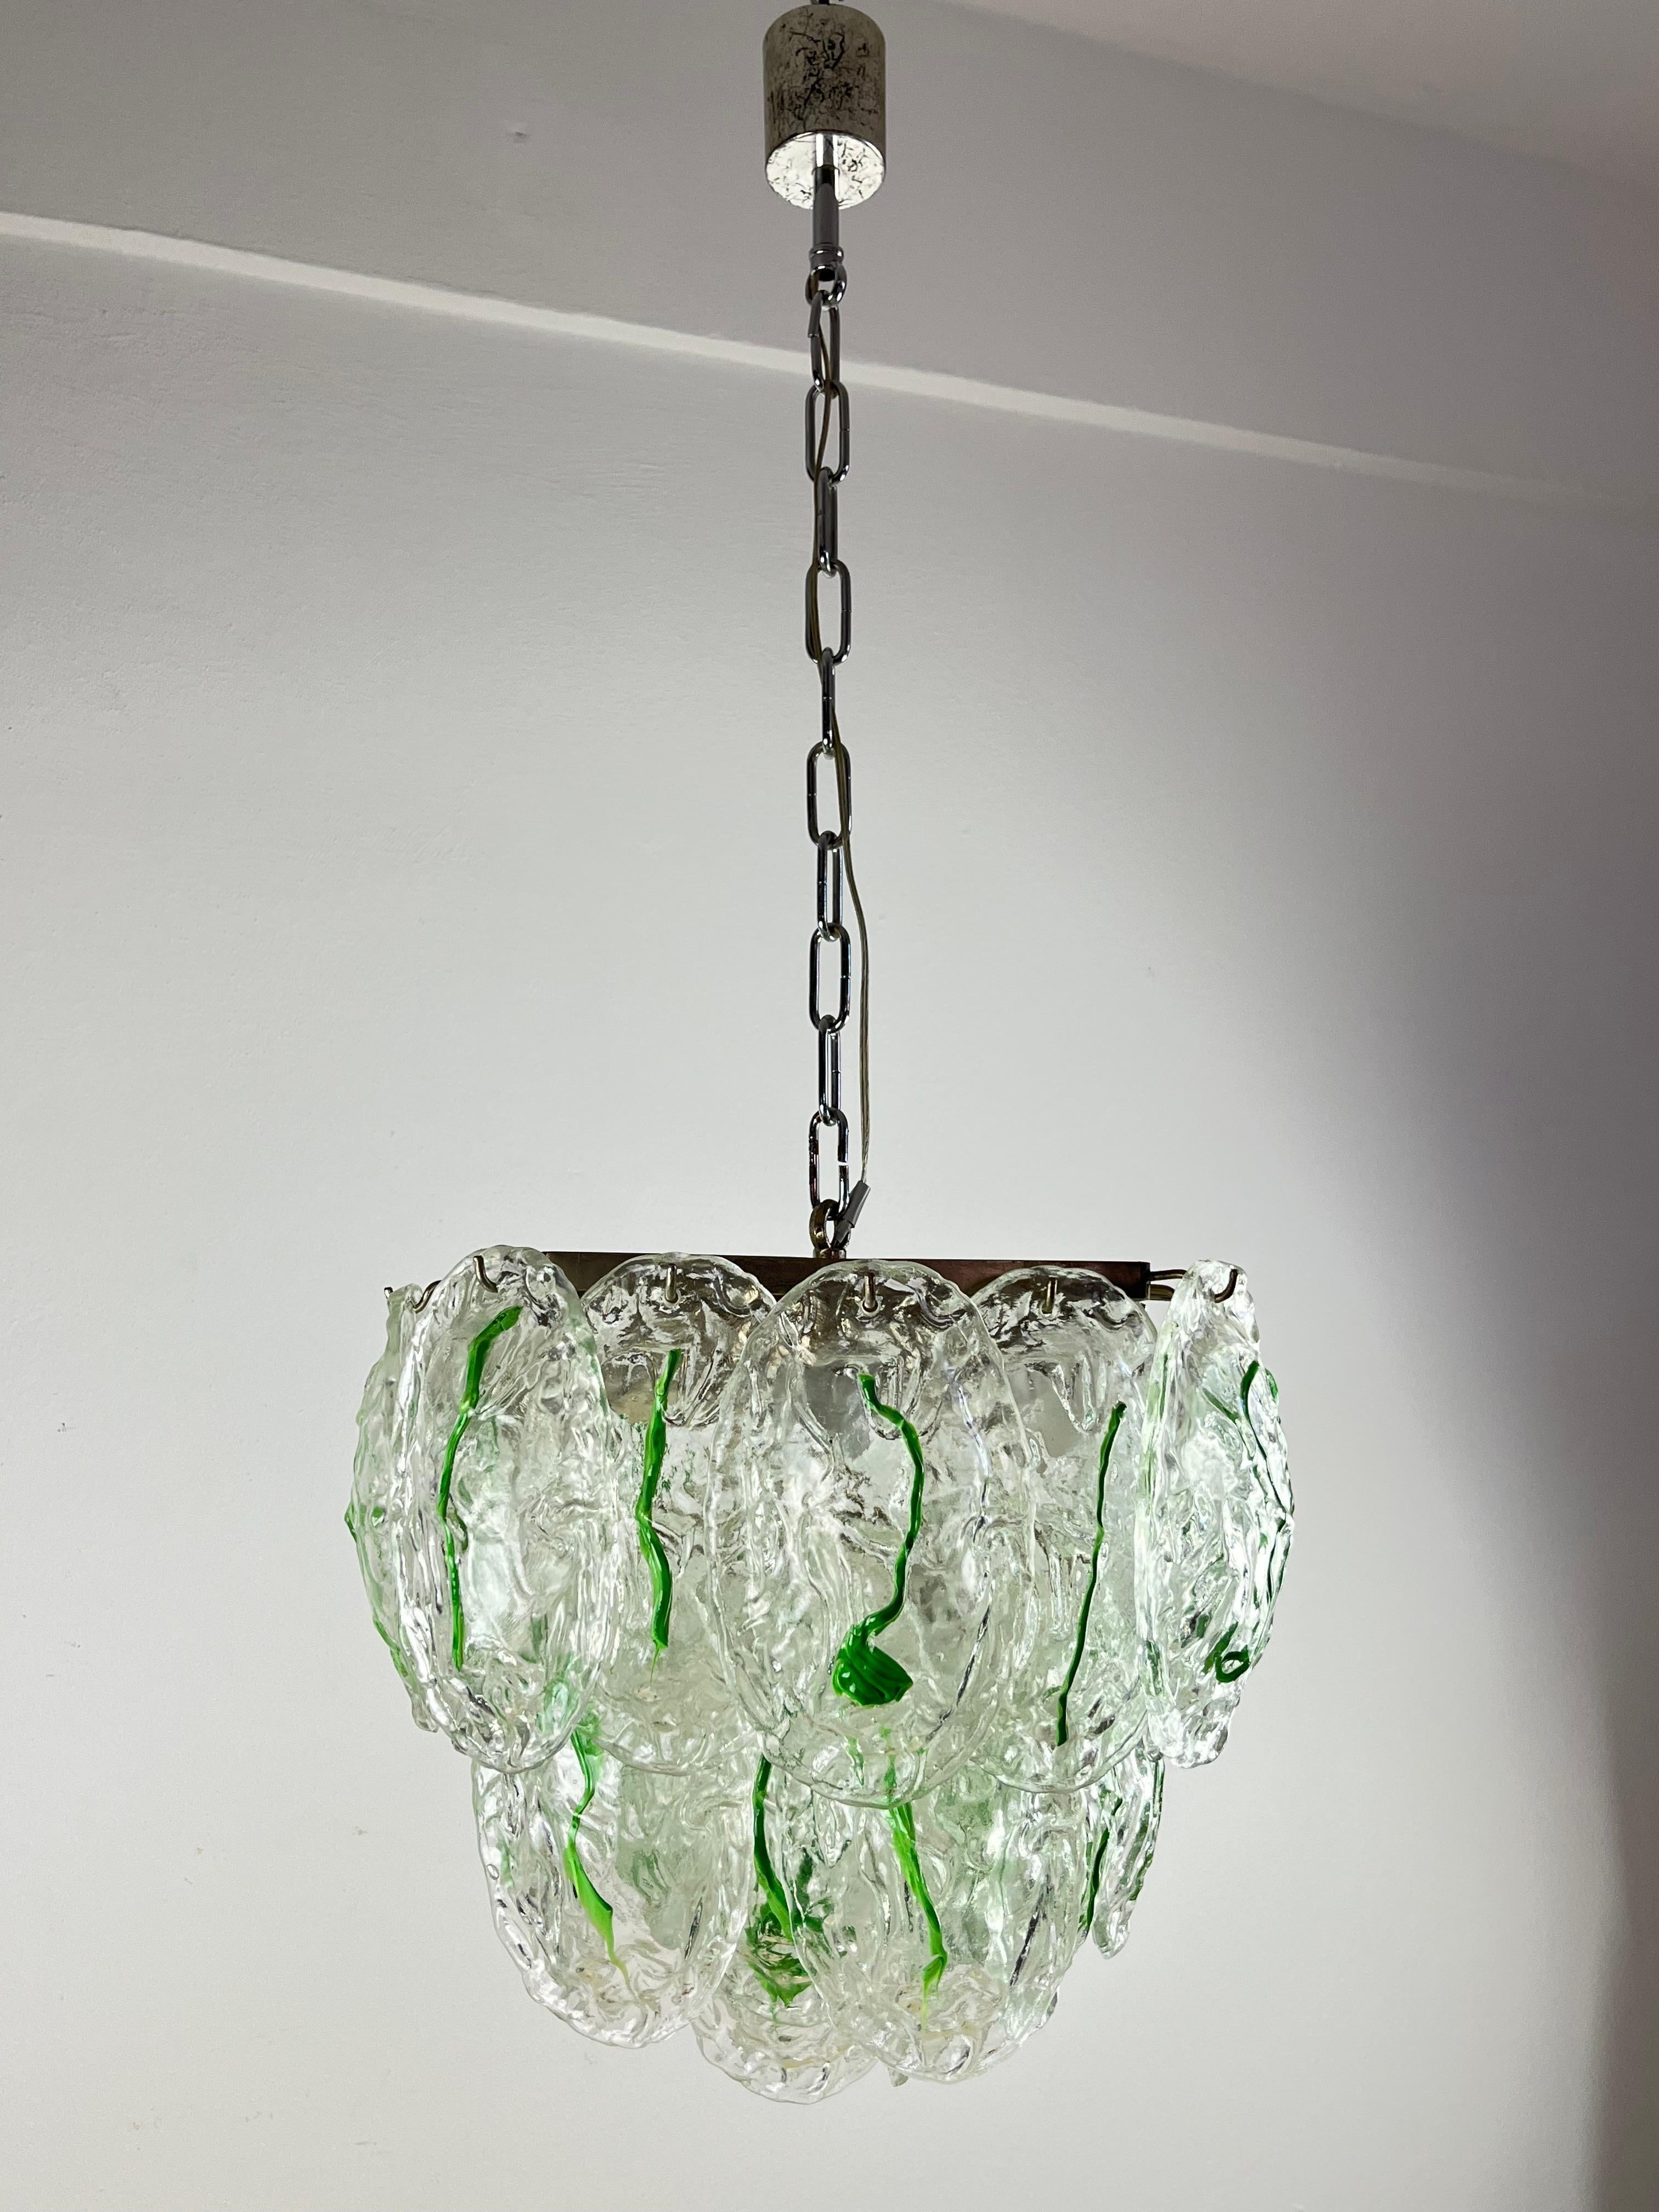 Six-light Murano glass chandelier by Vistosi, made in Italy, 1960s
Found in an interior designer's apartment, it is intact and functional. Composed of a metal structure where thirty-two oval glasses are hung. Very small signs of aging on the